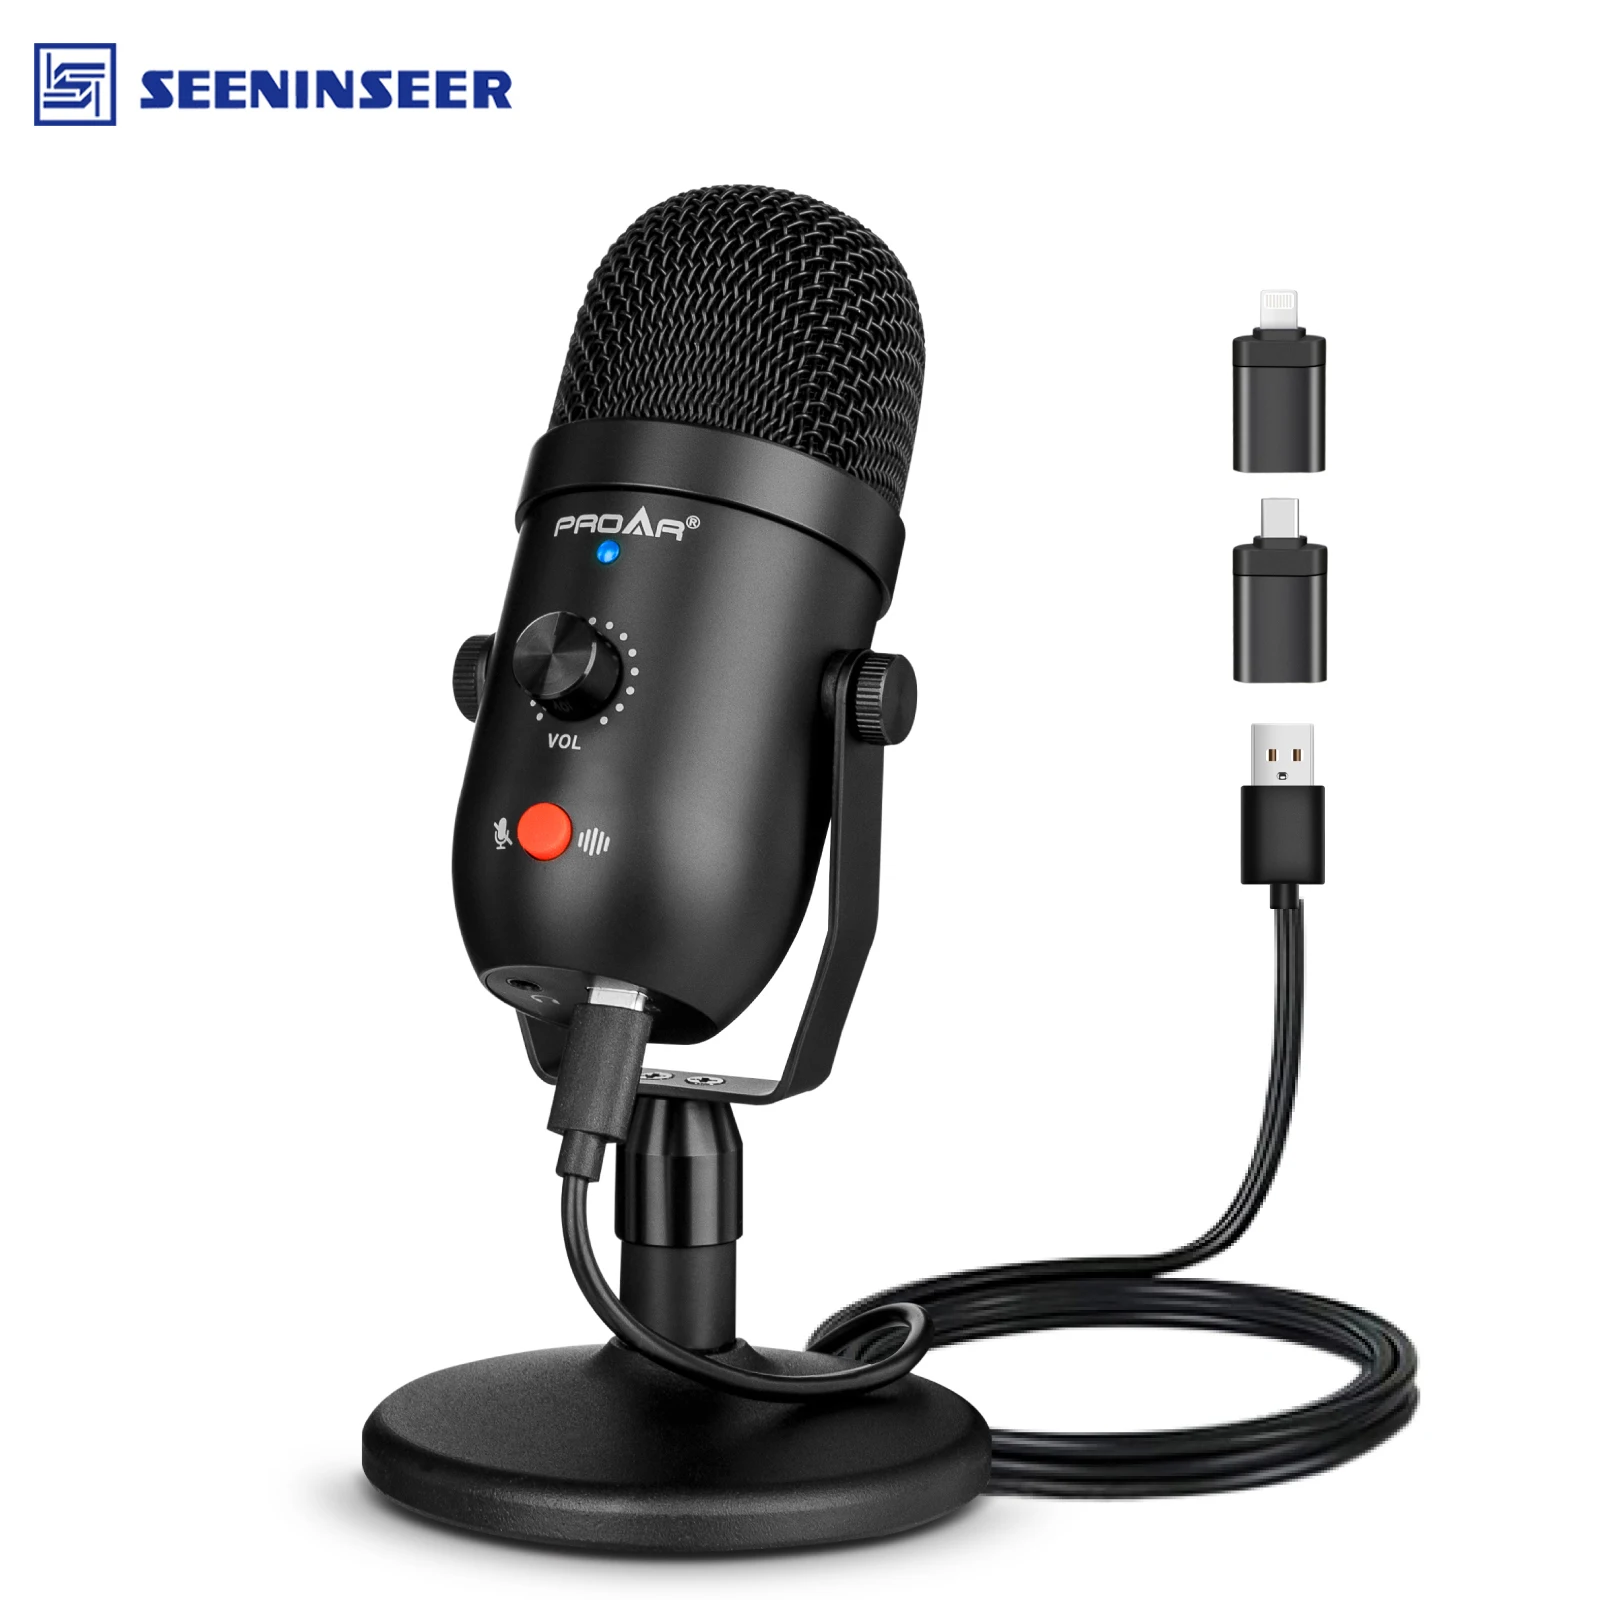 Usb Condenser Microphone For Pc,iphone,type-c Phone With Noise Reduction Computer,gaming,streaming,podcast,youtube - - AliExpress